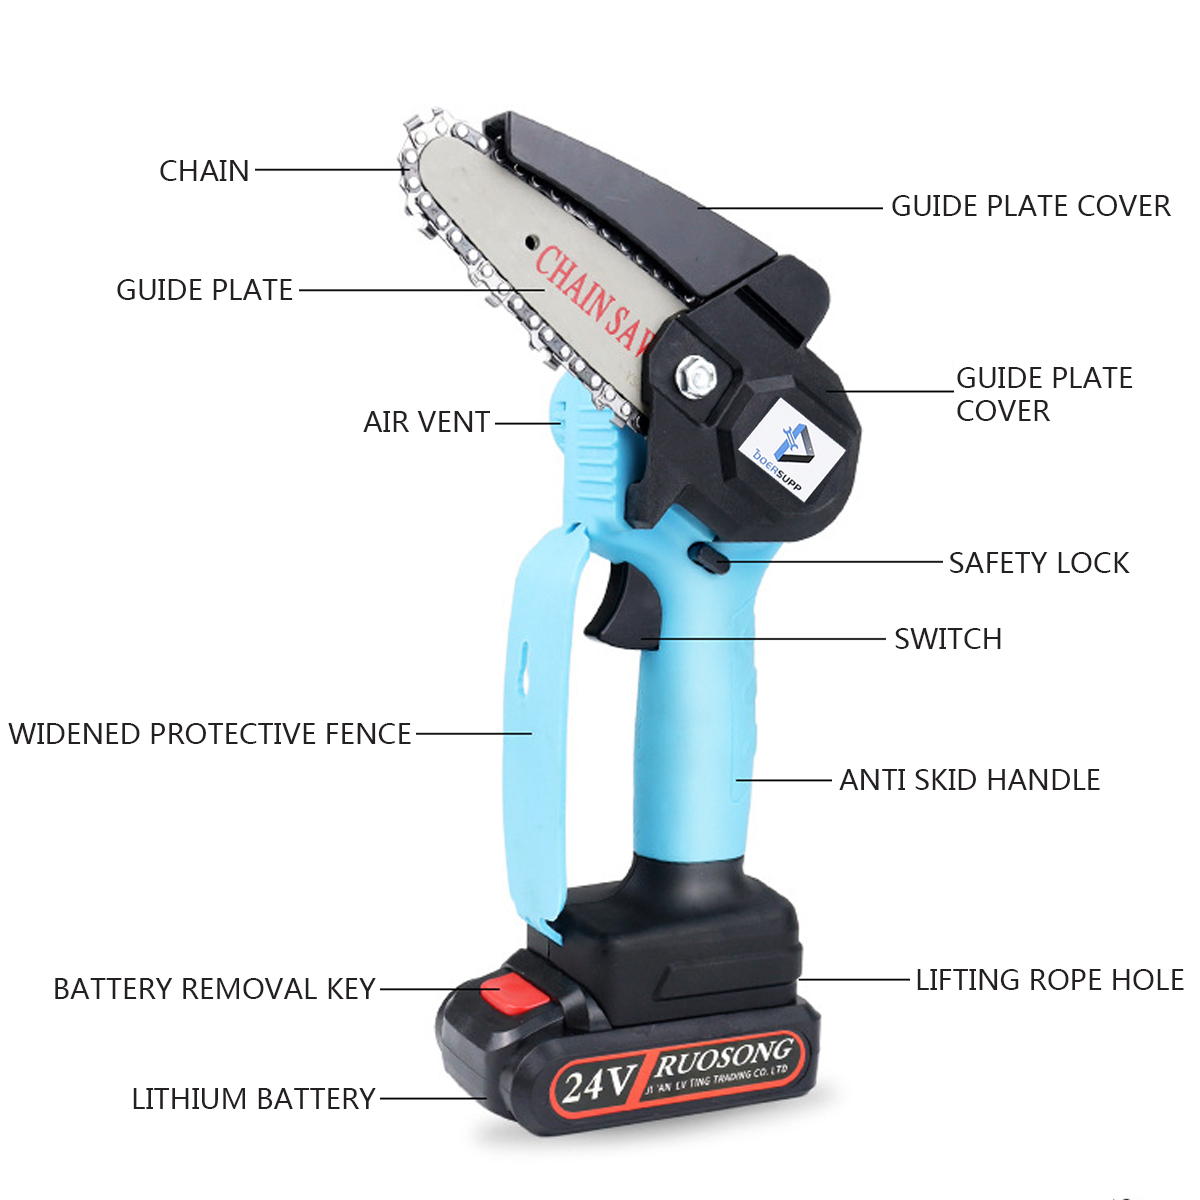 1000W-4Inch-Cordless-Electric-Chain-Saw-Wood-Mini-Cutter-One-Hand-Saw-Woodworking-Tool-W-None1pc-Bat-1833244-15